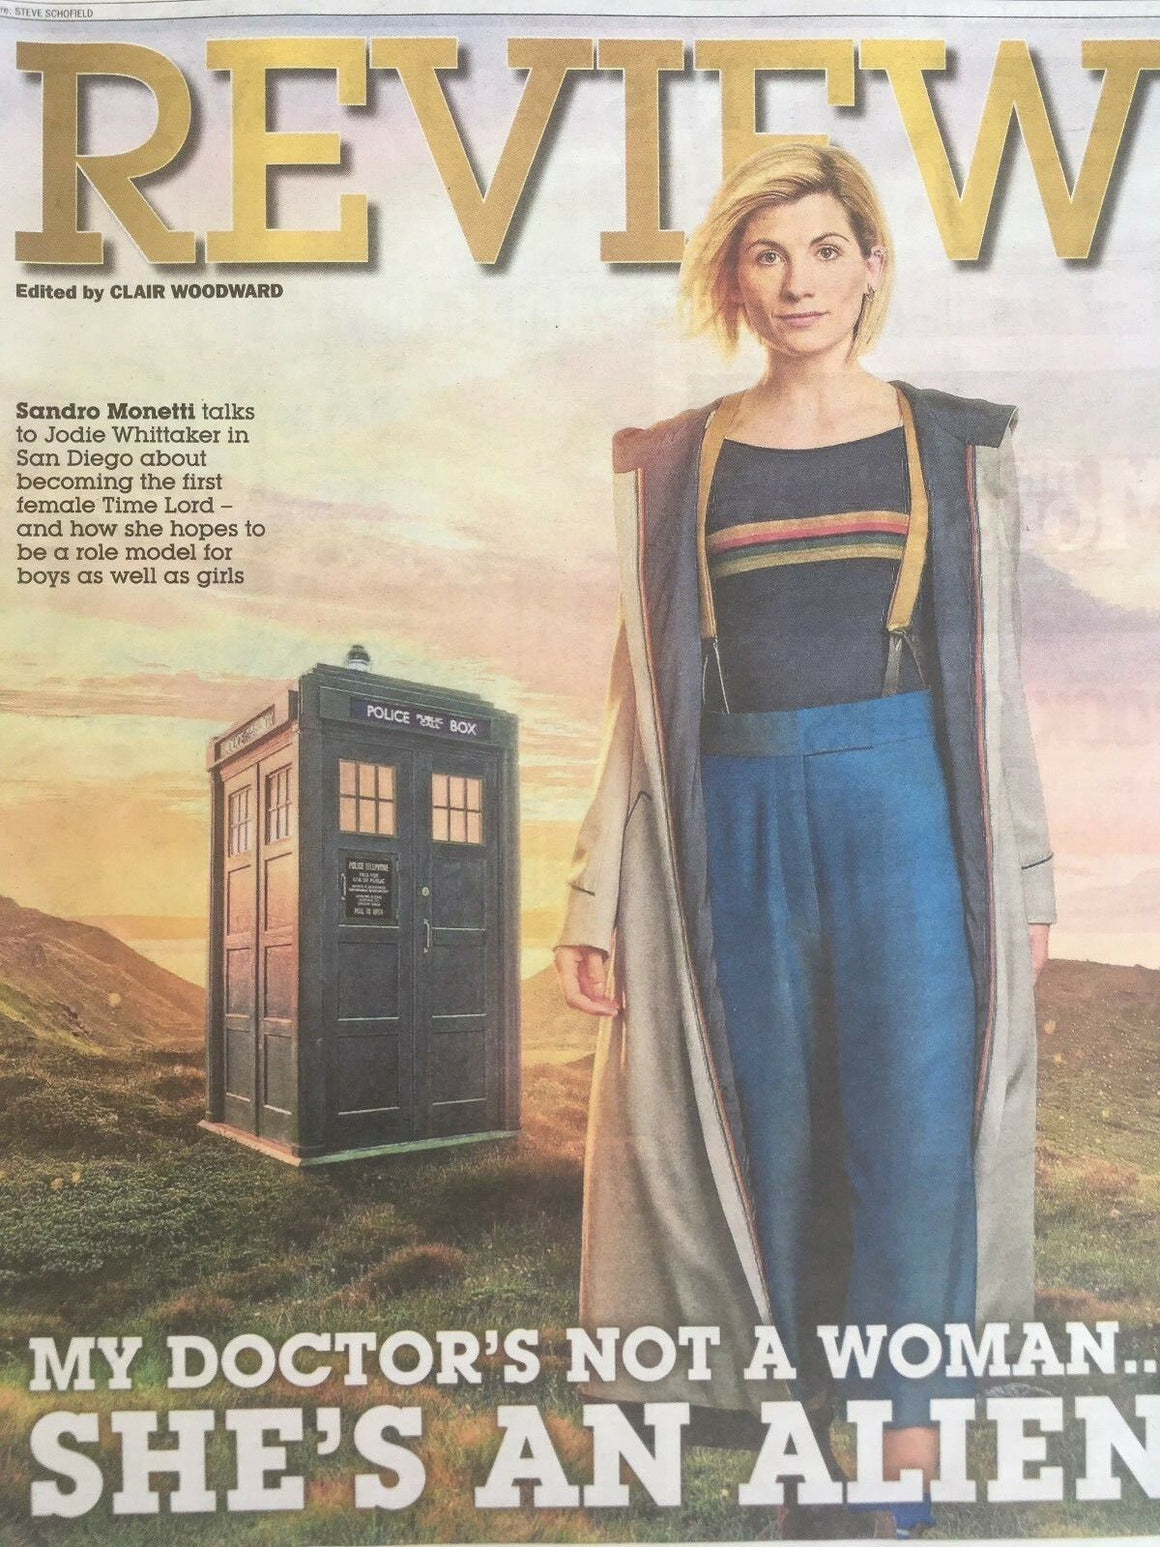 UK EXPRESS REVIEW July 2018: JODIE WHITTAKER (DOCTOR WHO) COVER FEATURE